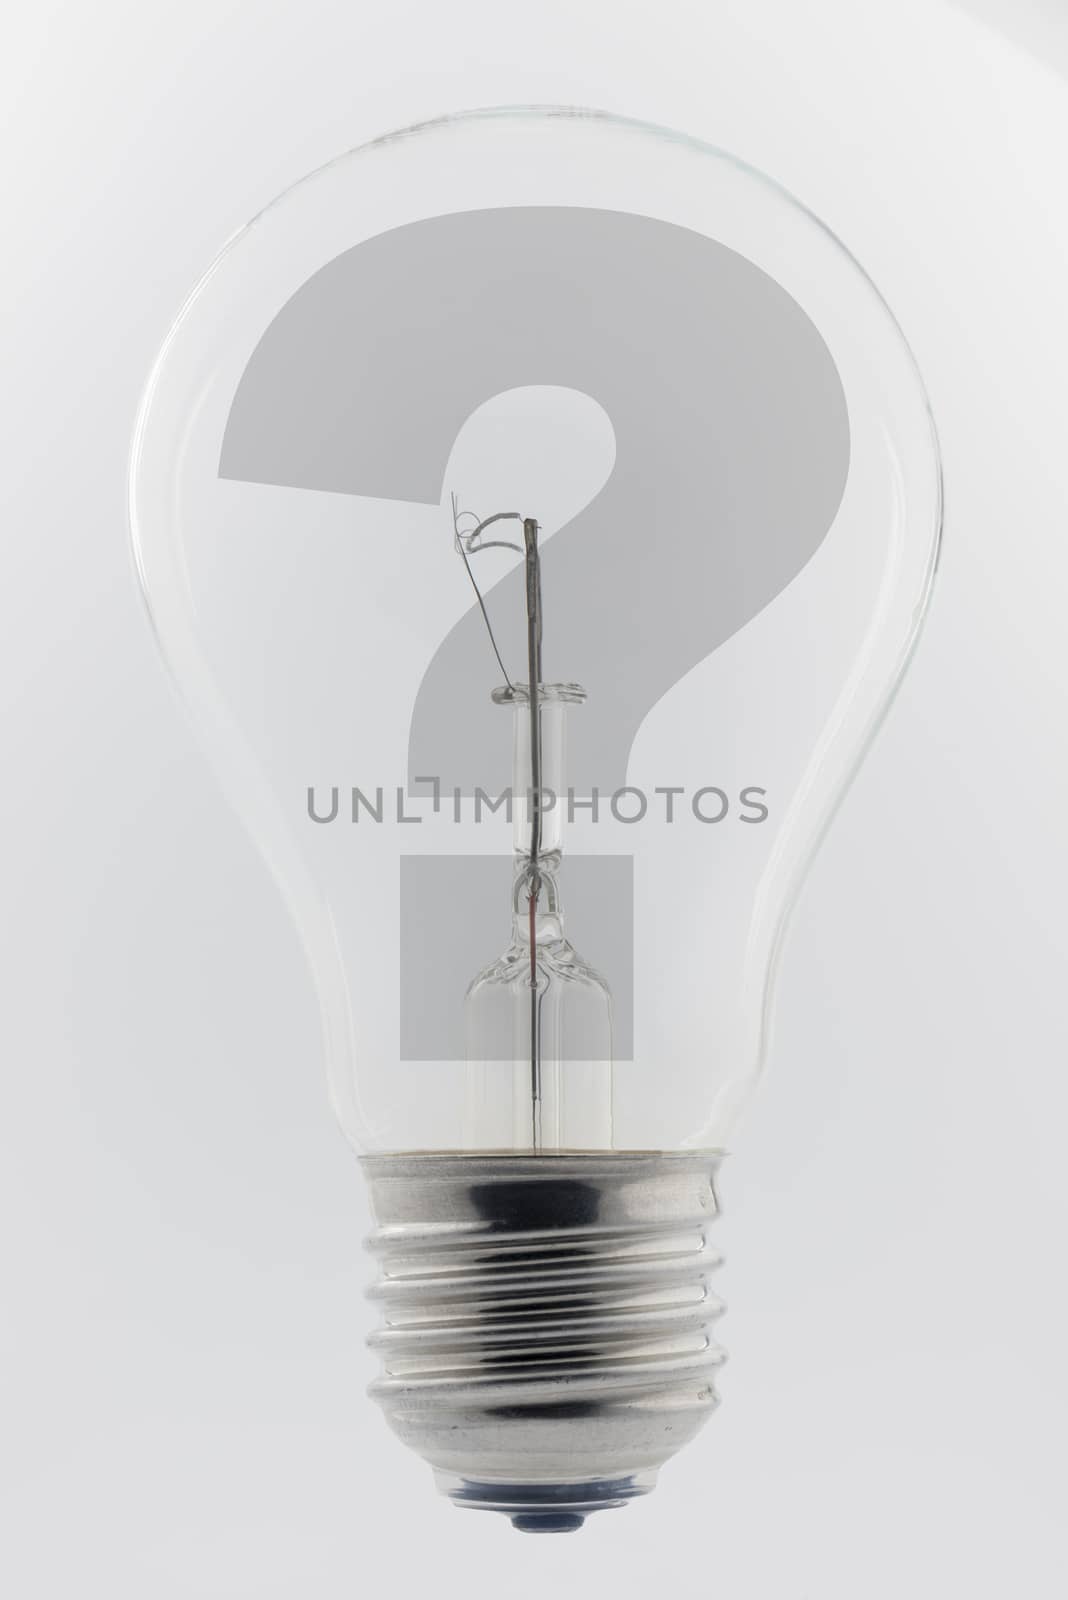 Light bulb with a question mark
 by Tofotografie